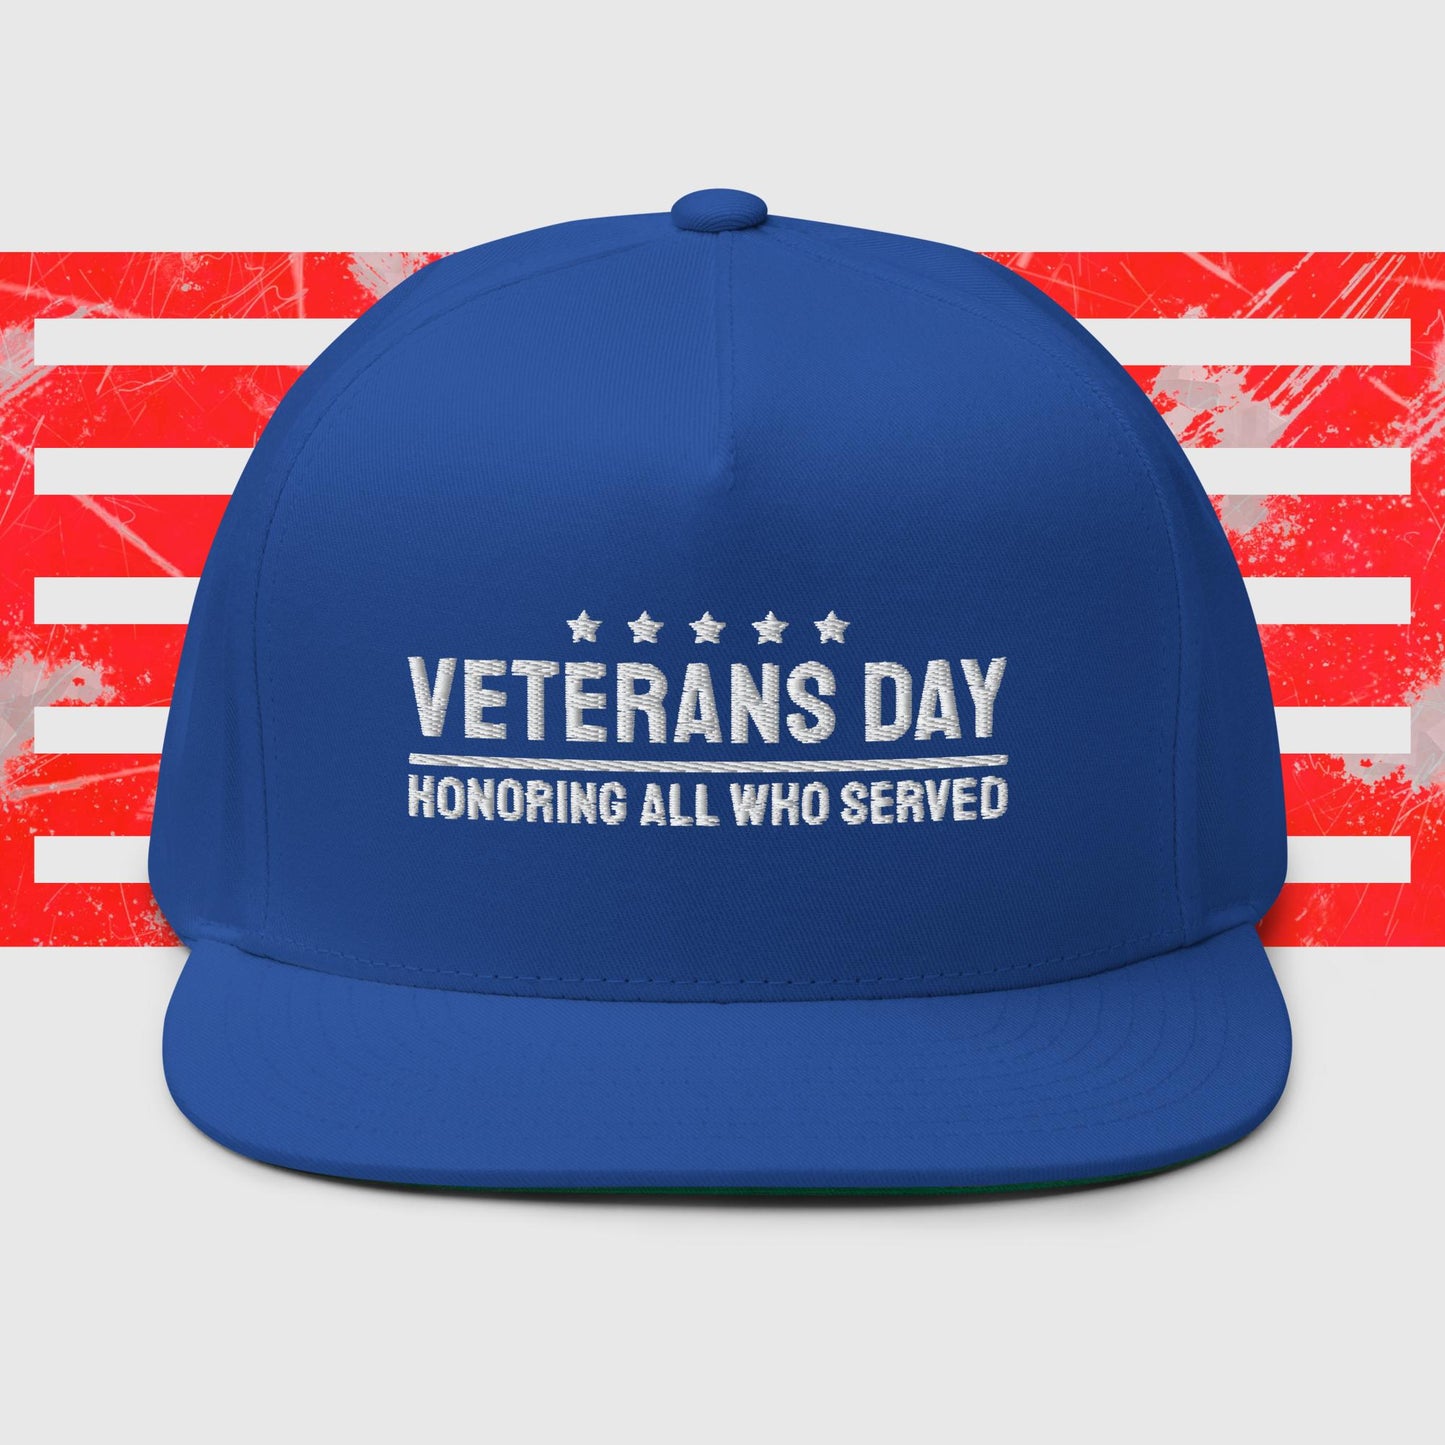 PATRIOTIC CAP VETERANS DAY HONORING ALL WHO SERVED